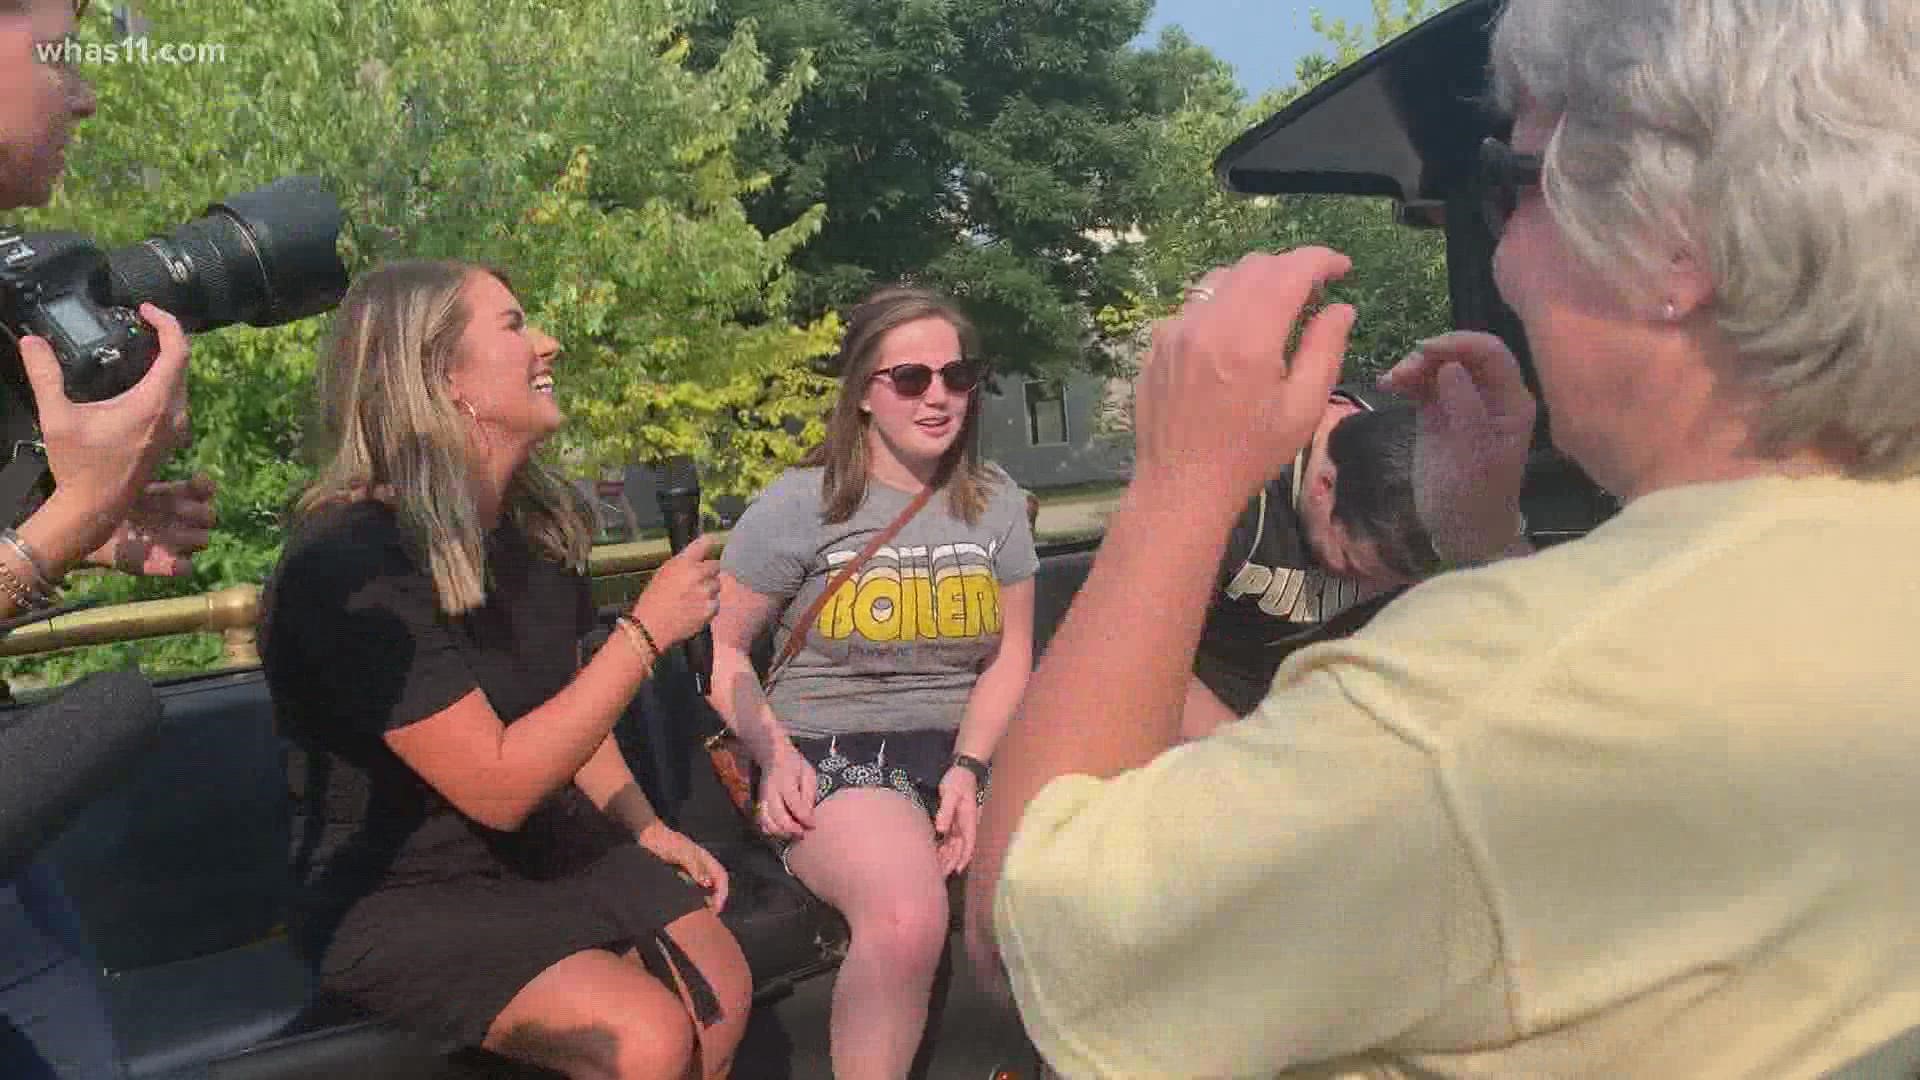 Emily Harvath thought she was just going for a walk on the Monon Trail with her mom when the Boilermaker Special pulled up with the surprise Tuesday.